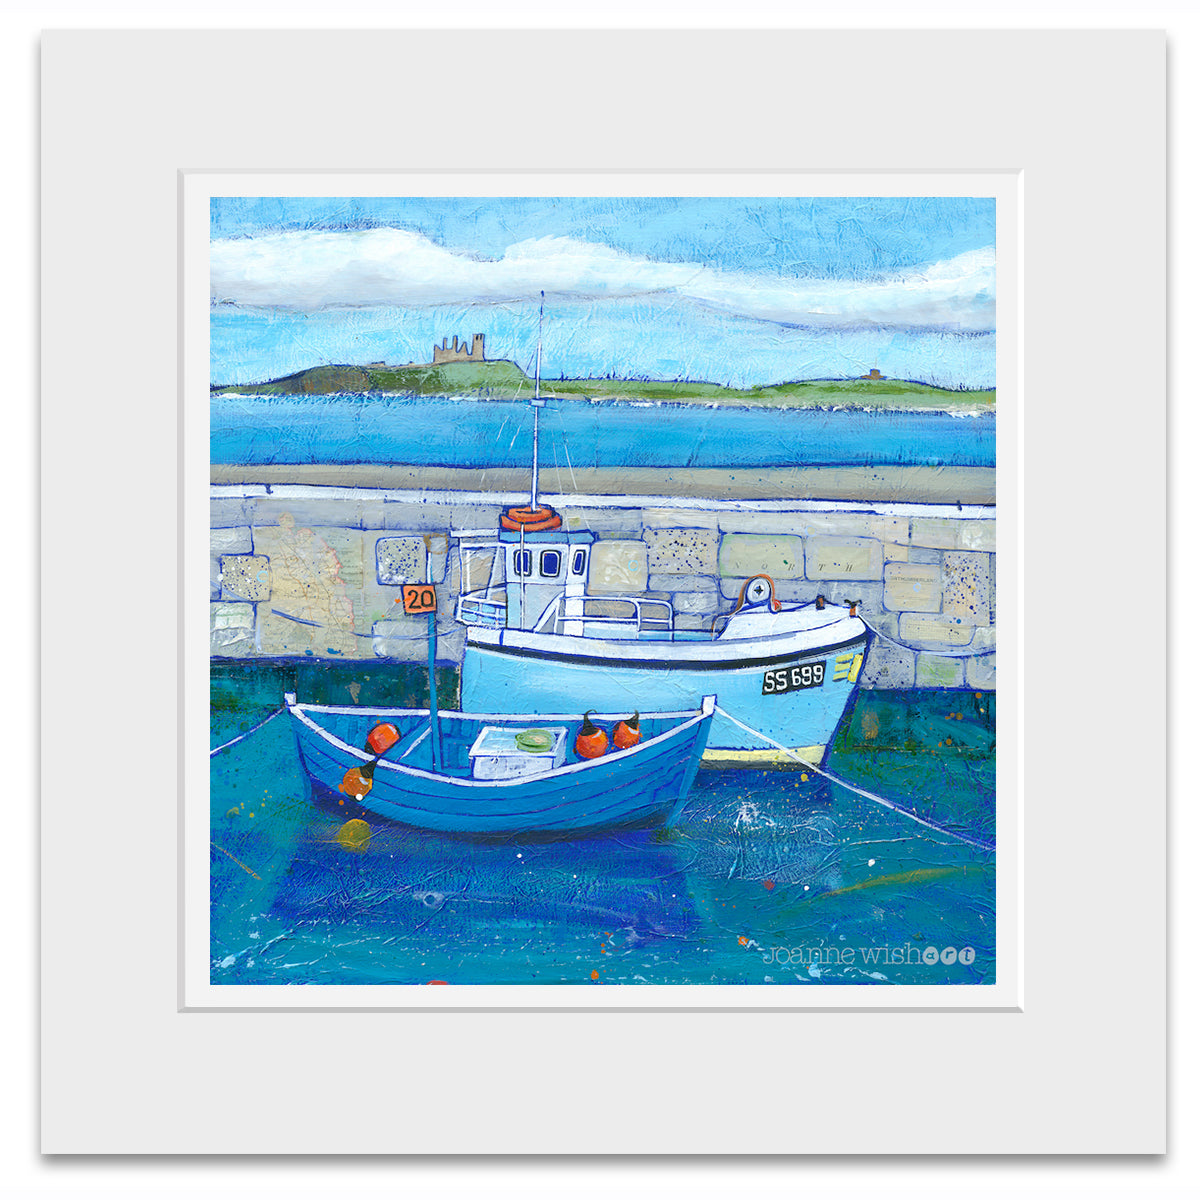 A mounted fine art print of Beadnell harbour in Northumberland.